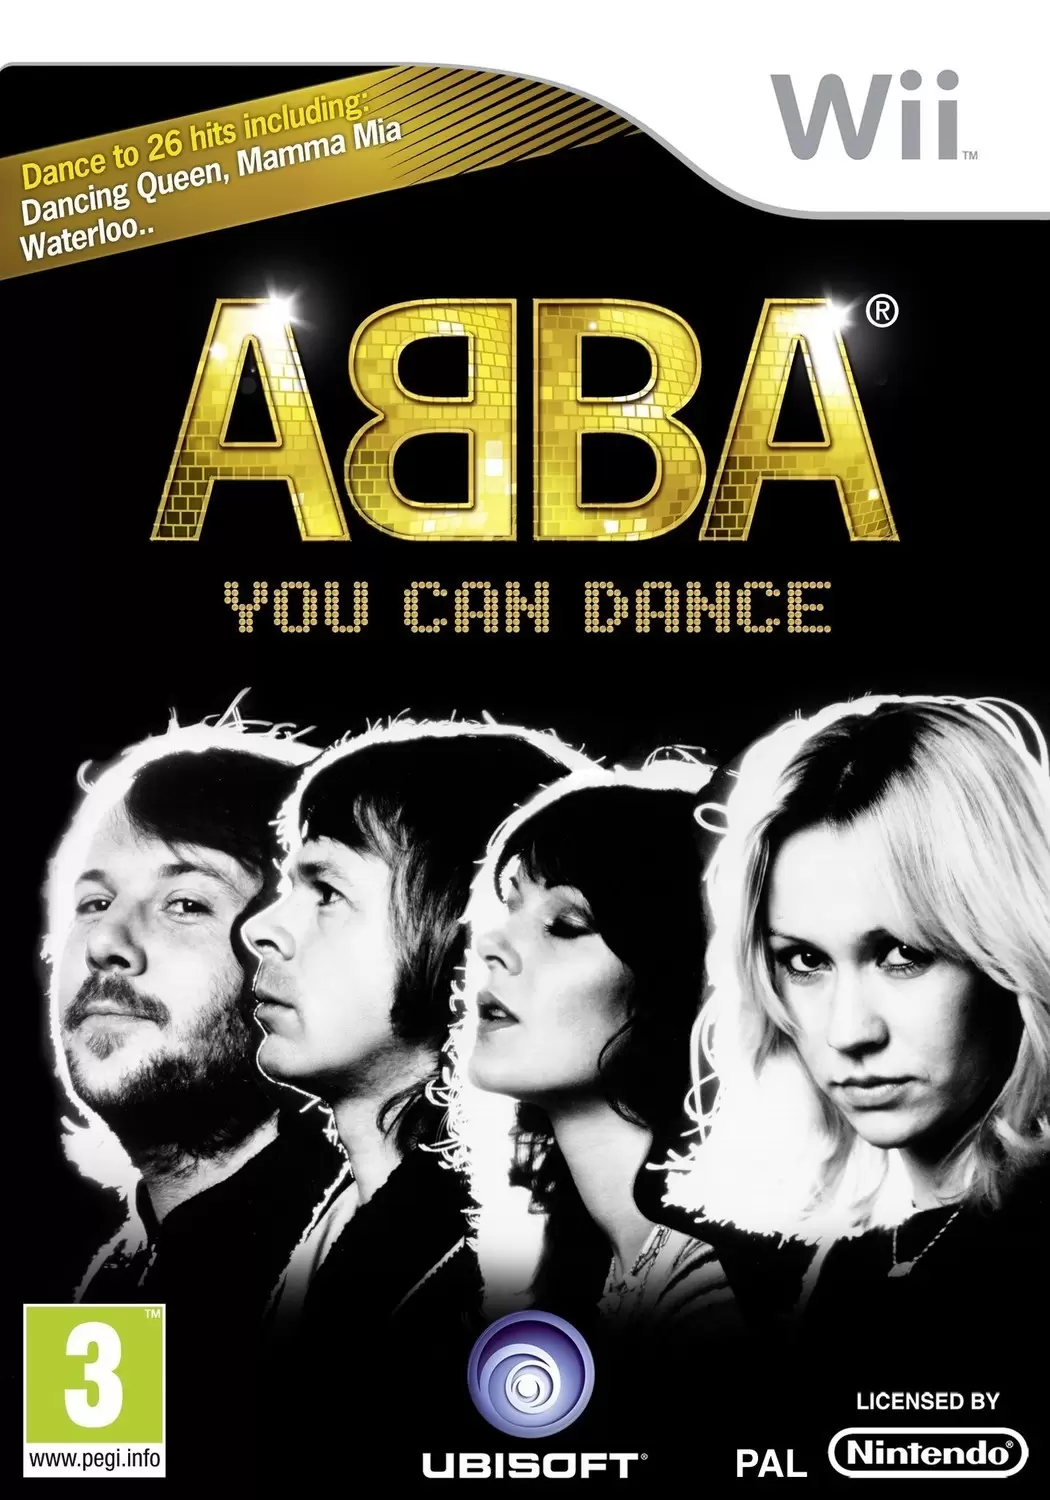 Jeux Nintendo Wii - ABBA: You Can Dance